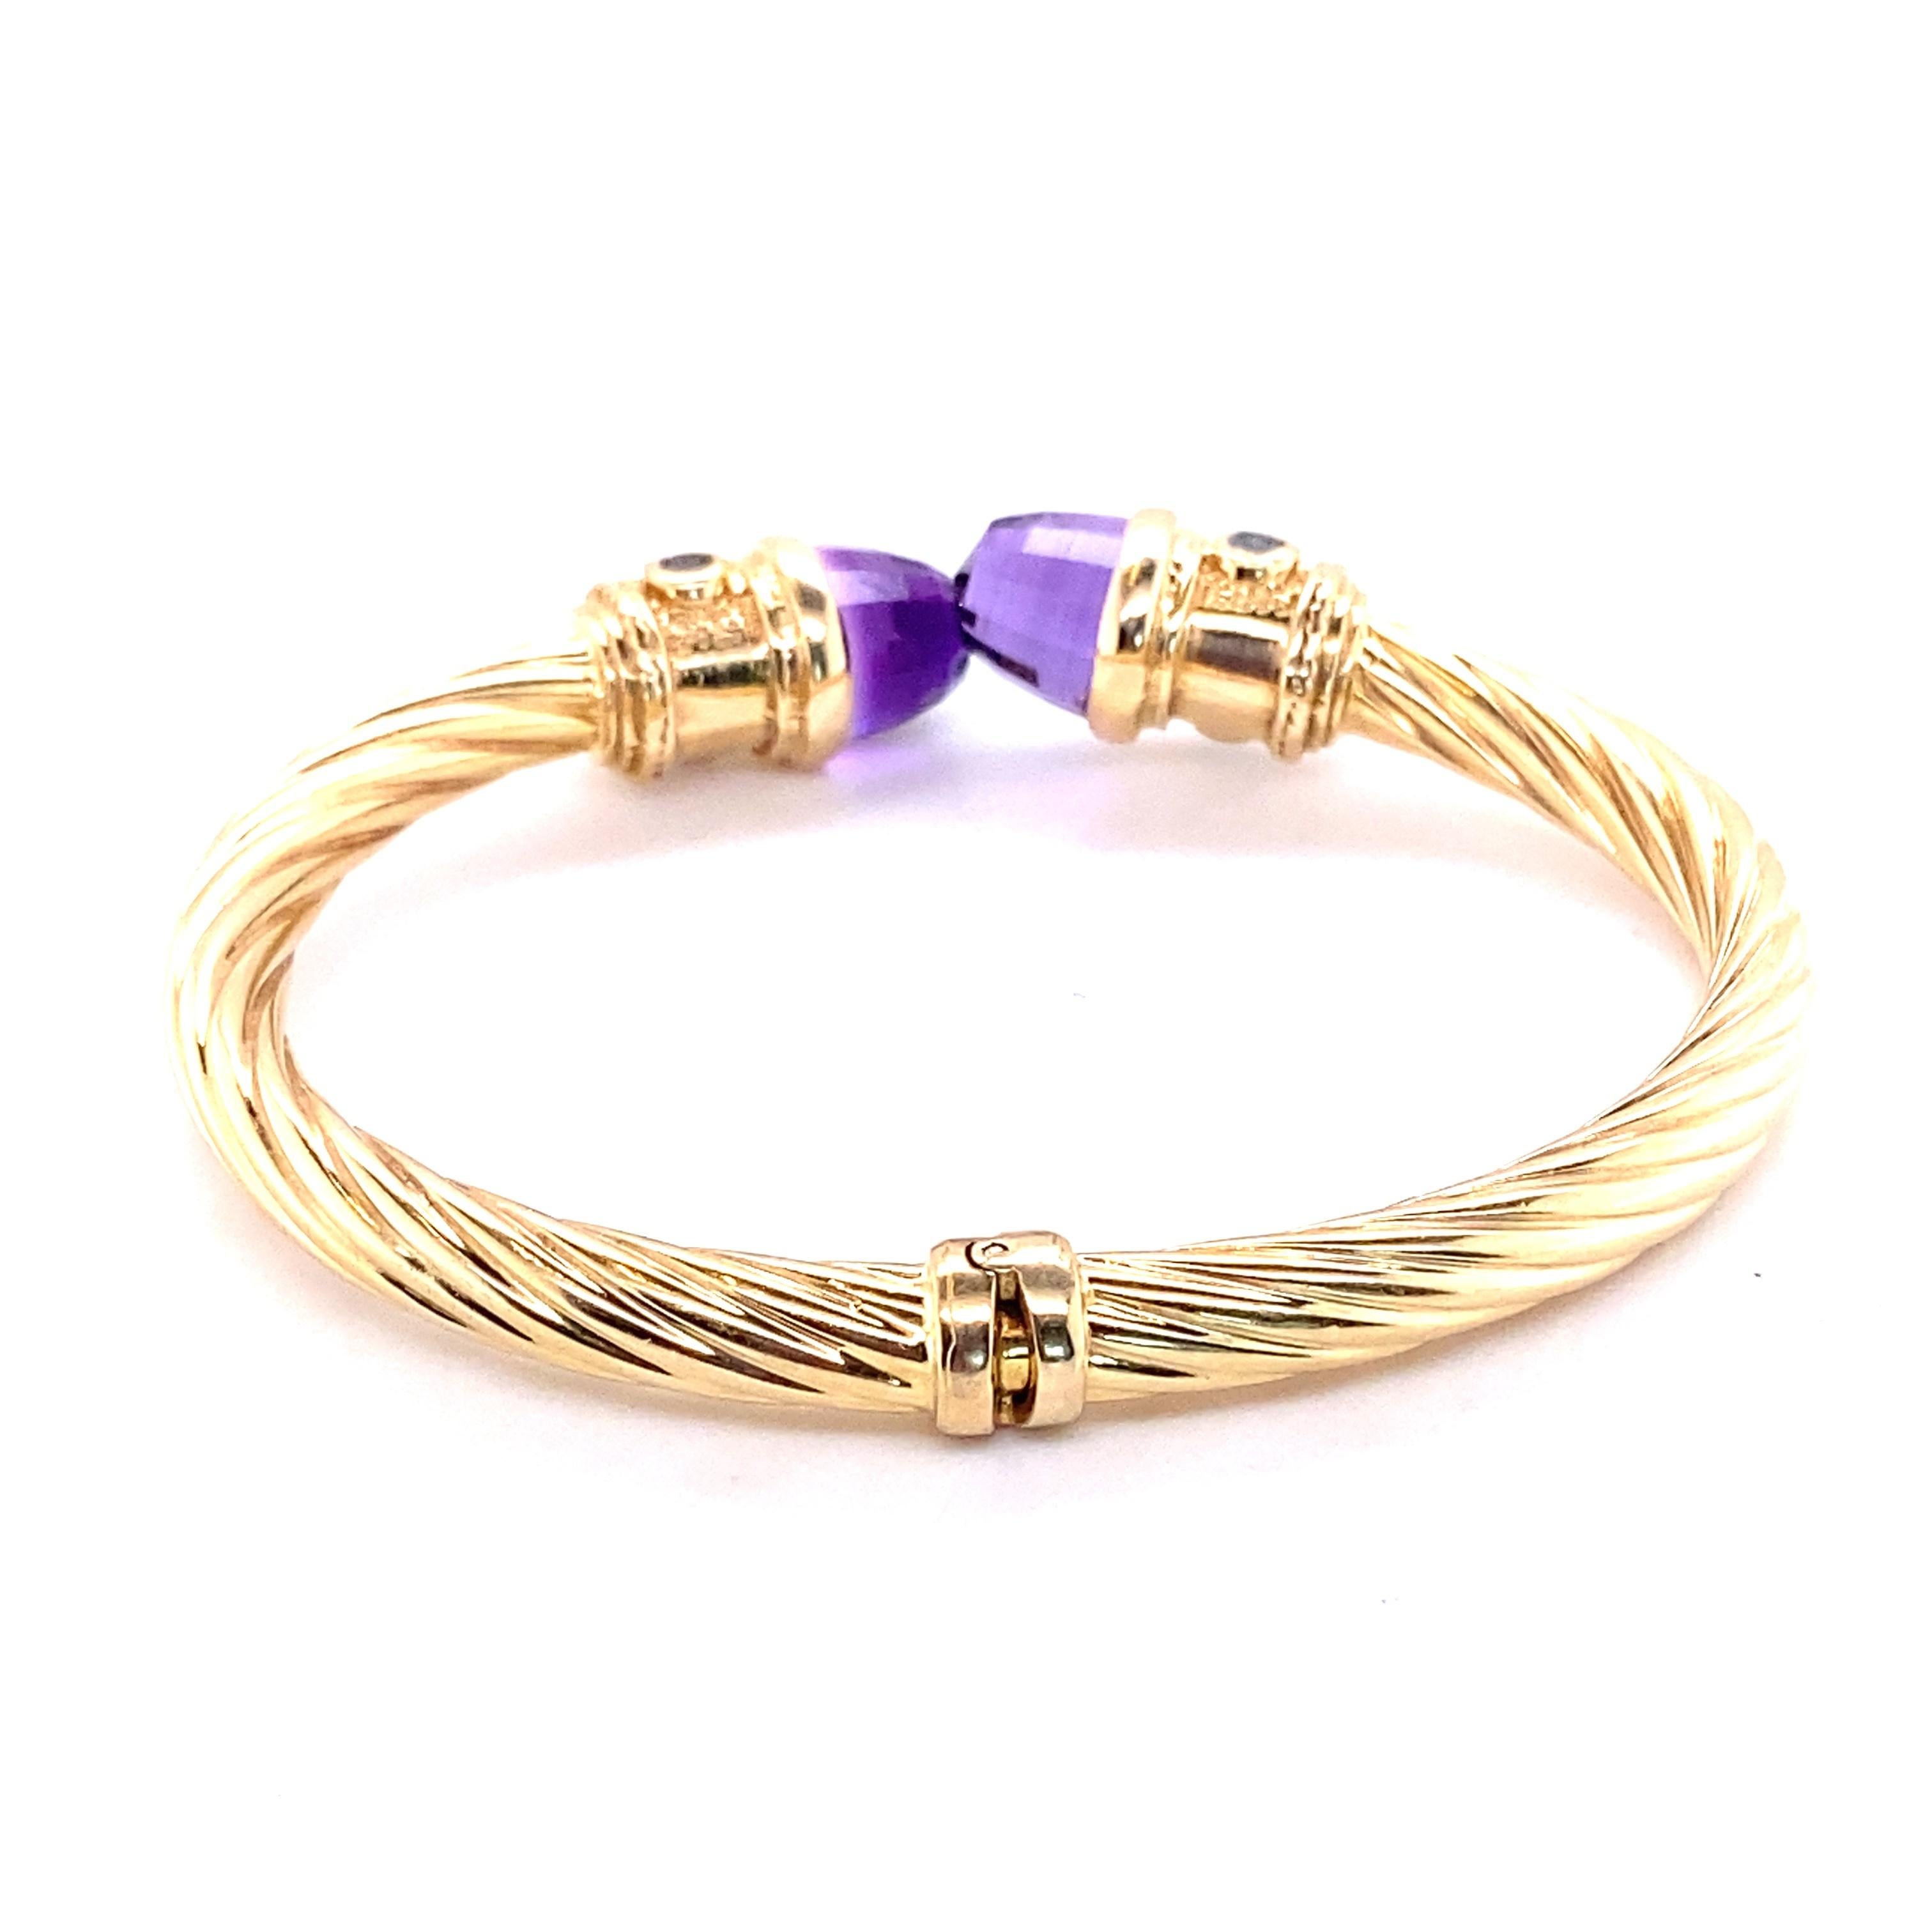 14K yellow gold bangle bracelet featuring amethyst terminals and bezel-set blue stones. The bangle measures approximately 6.5 inches in circumference and 6.00 mm in width. 

A great summer staple piece with a classic twisted cable design!